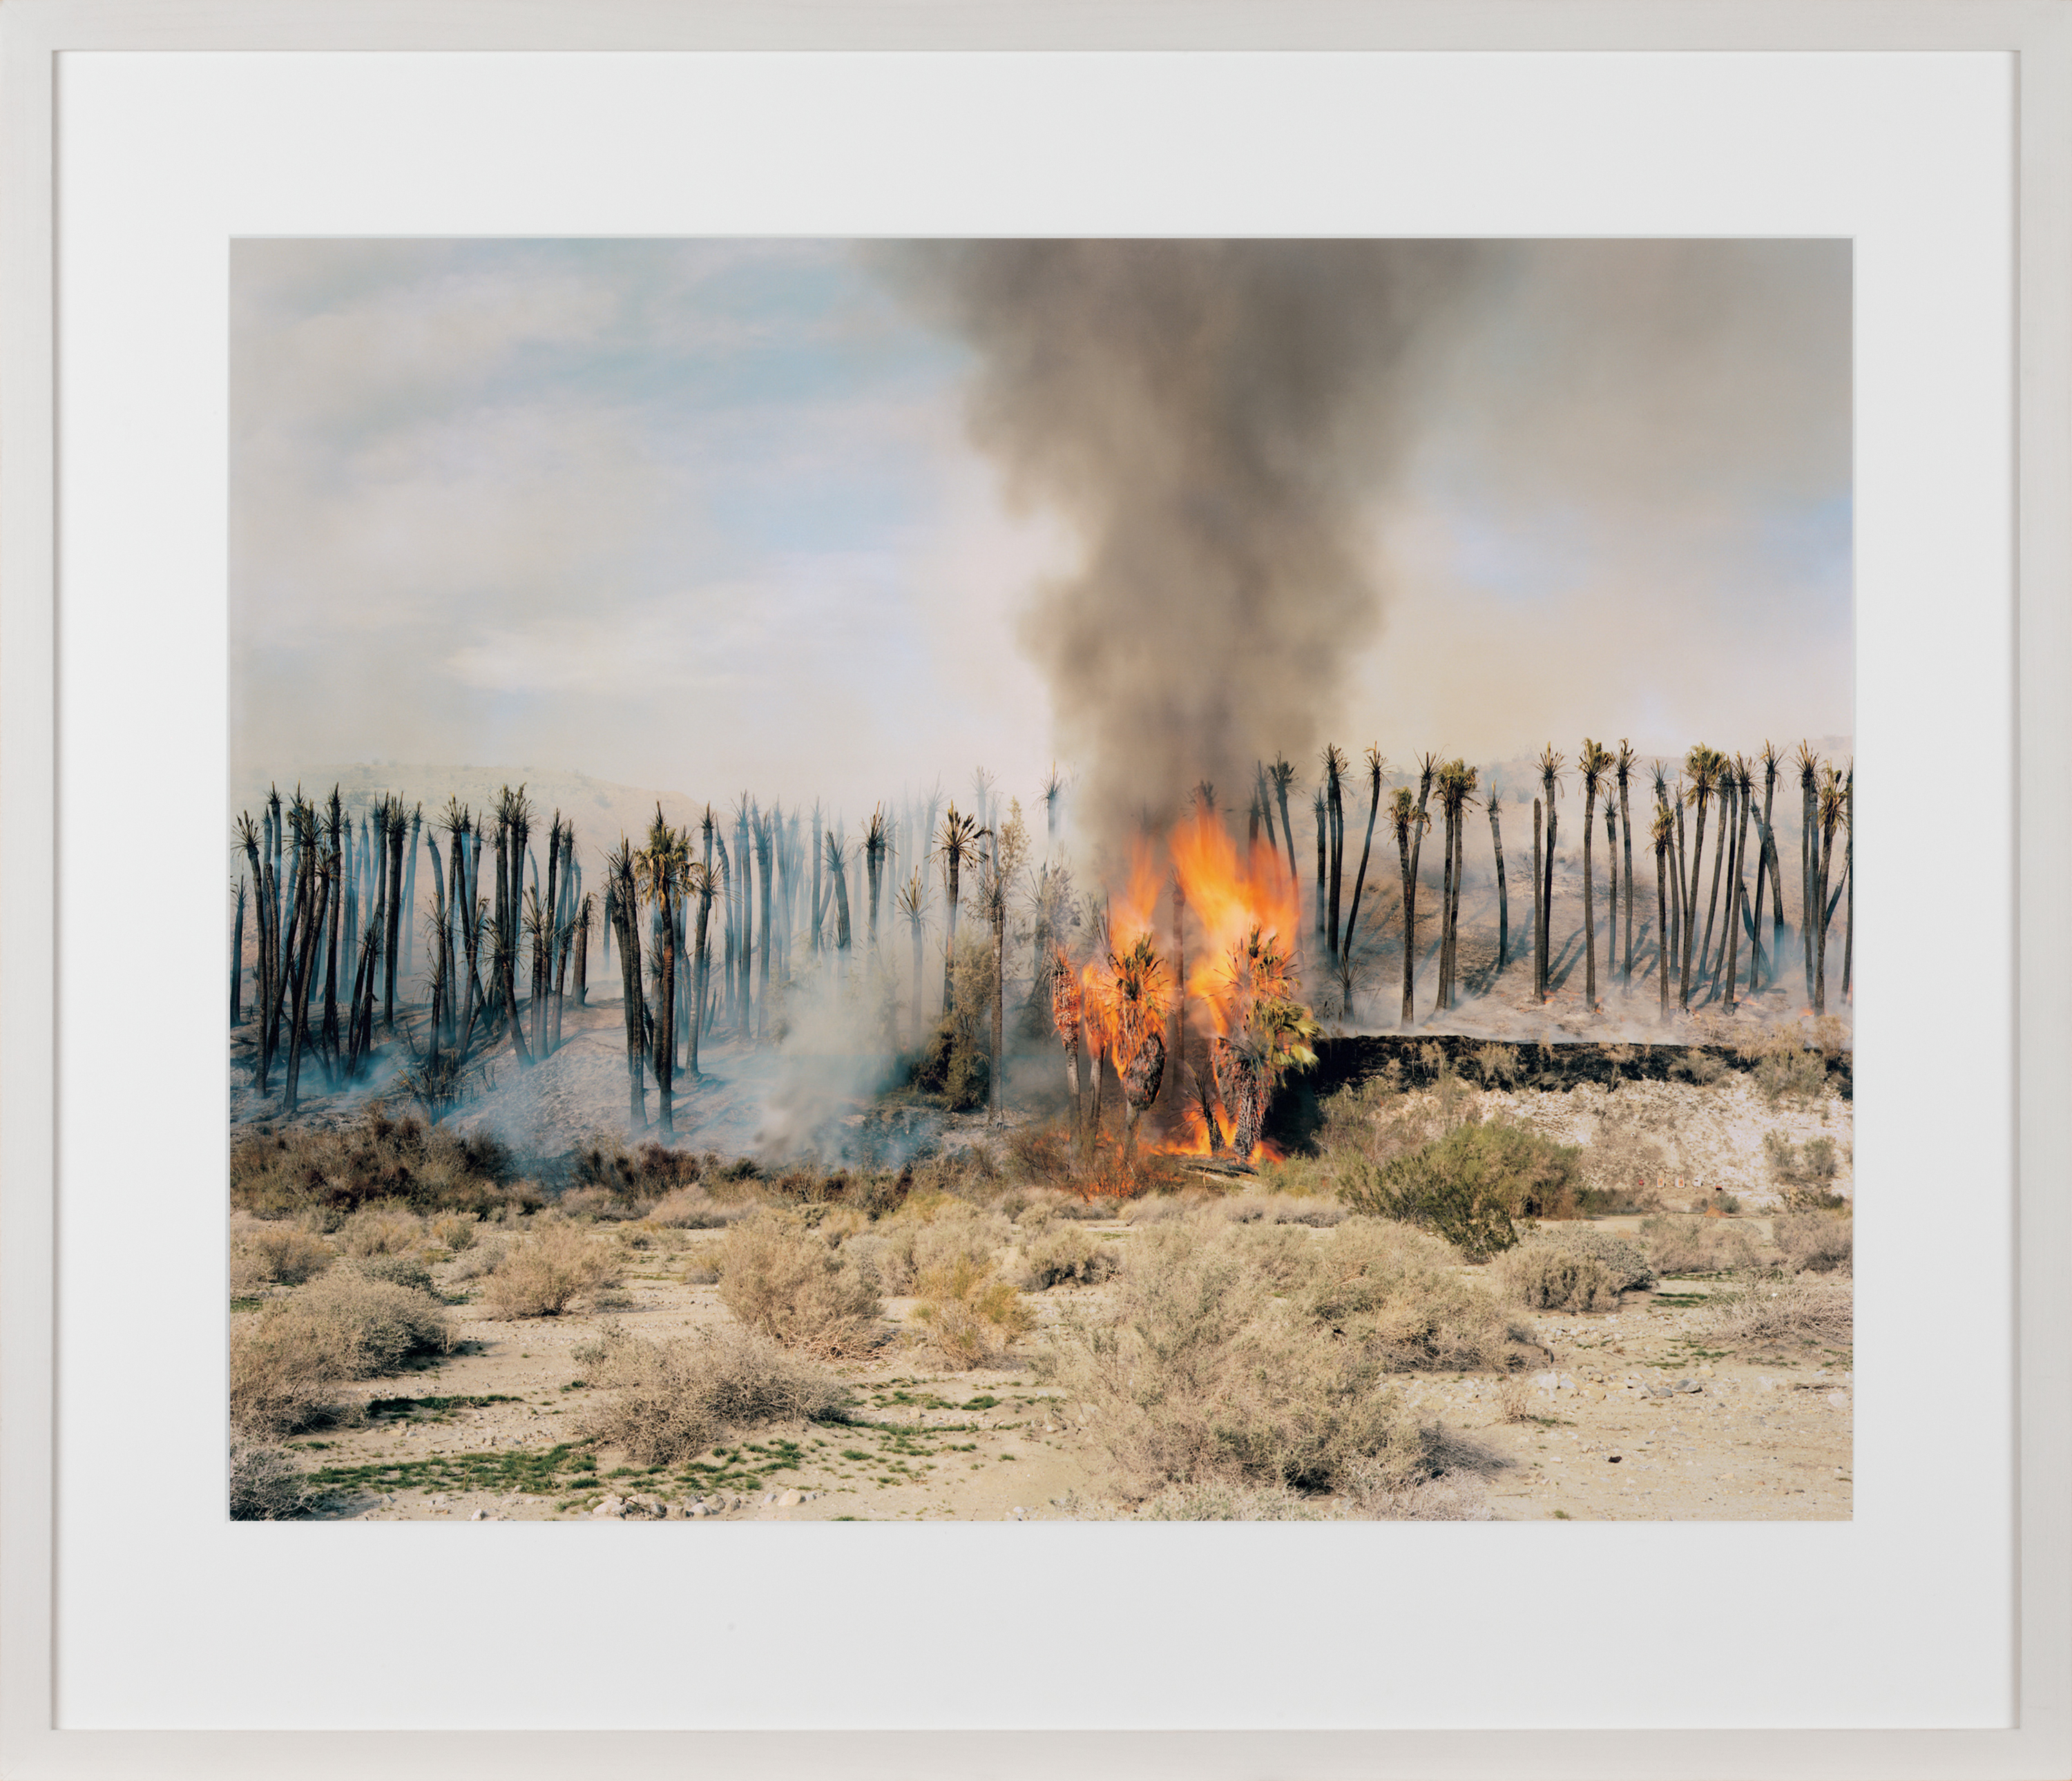 Color photograph of several palm trees burning in a controlled fire within the desert framed in white